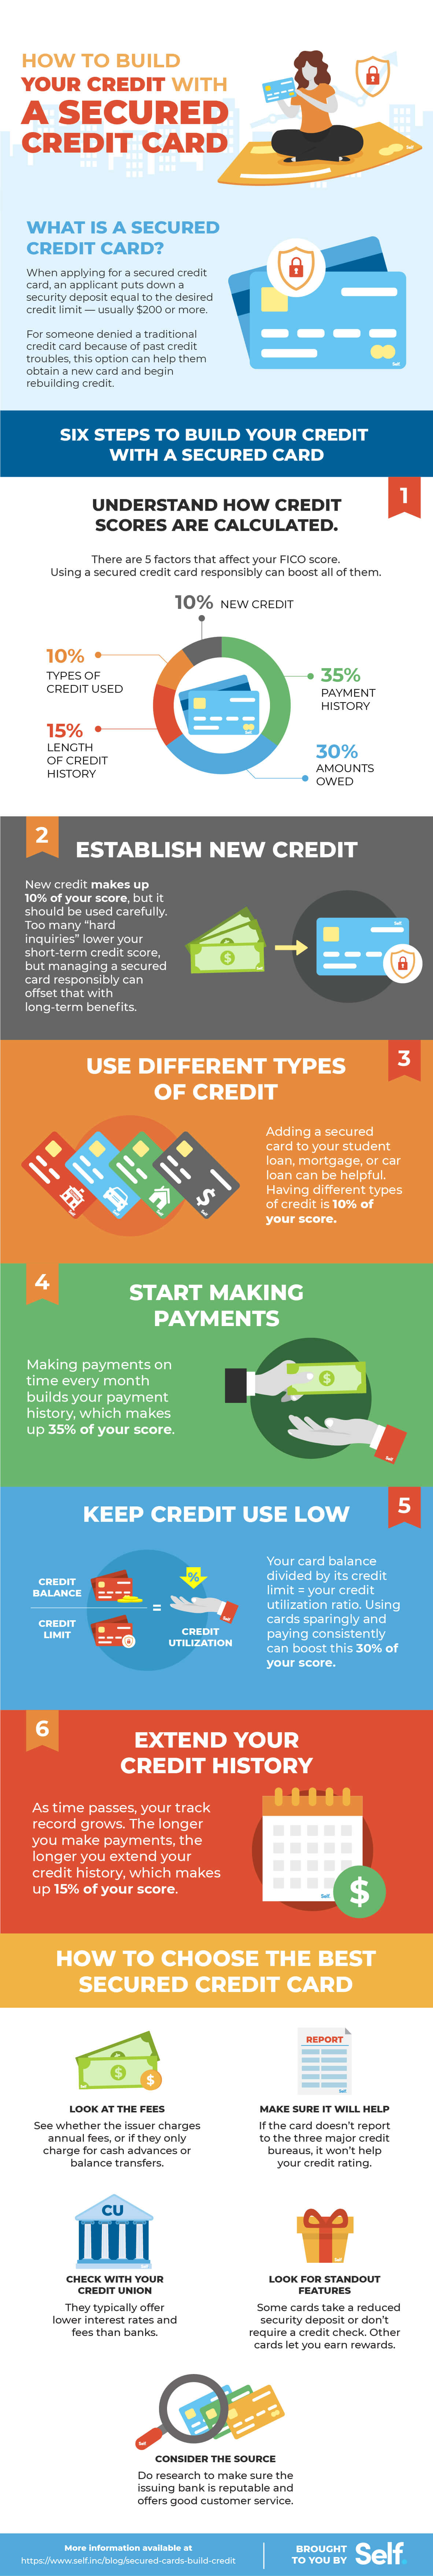 How to build credit with a secured credit card